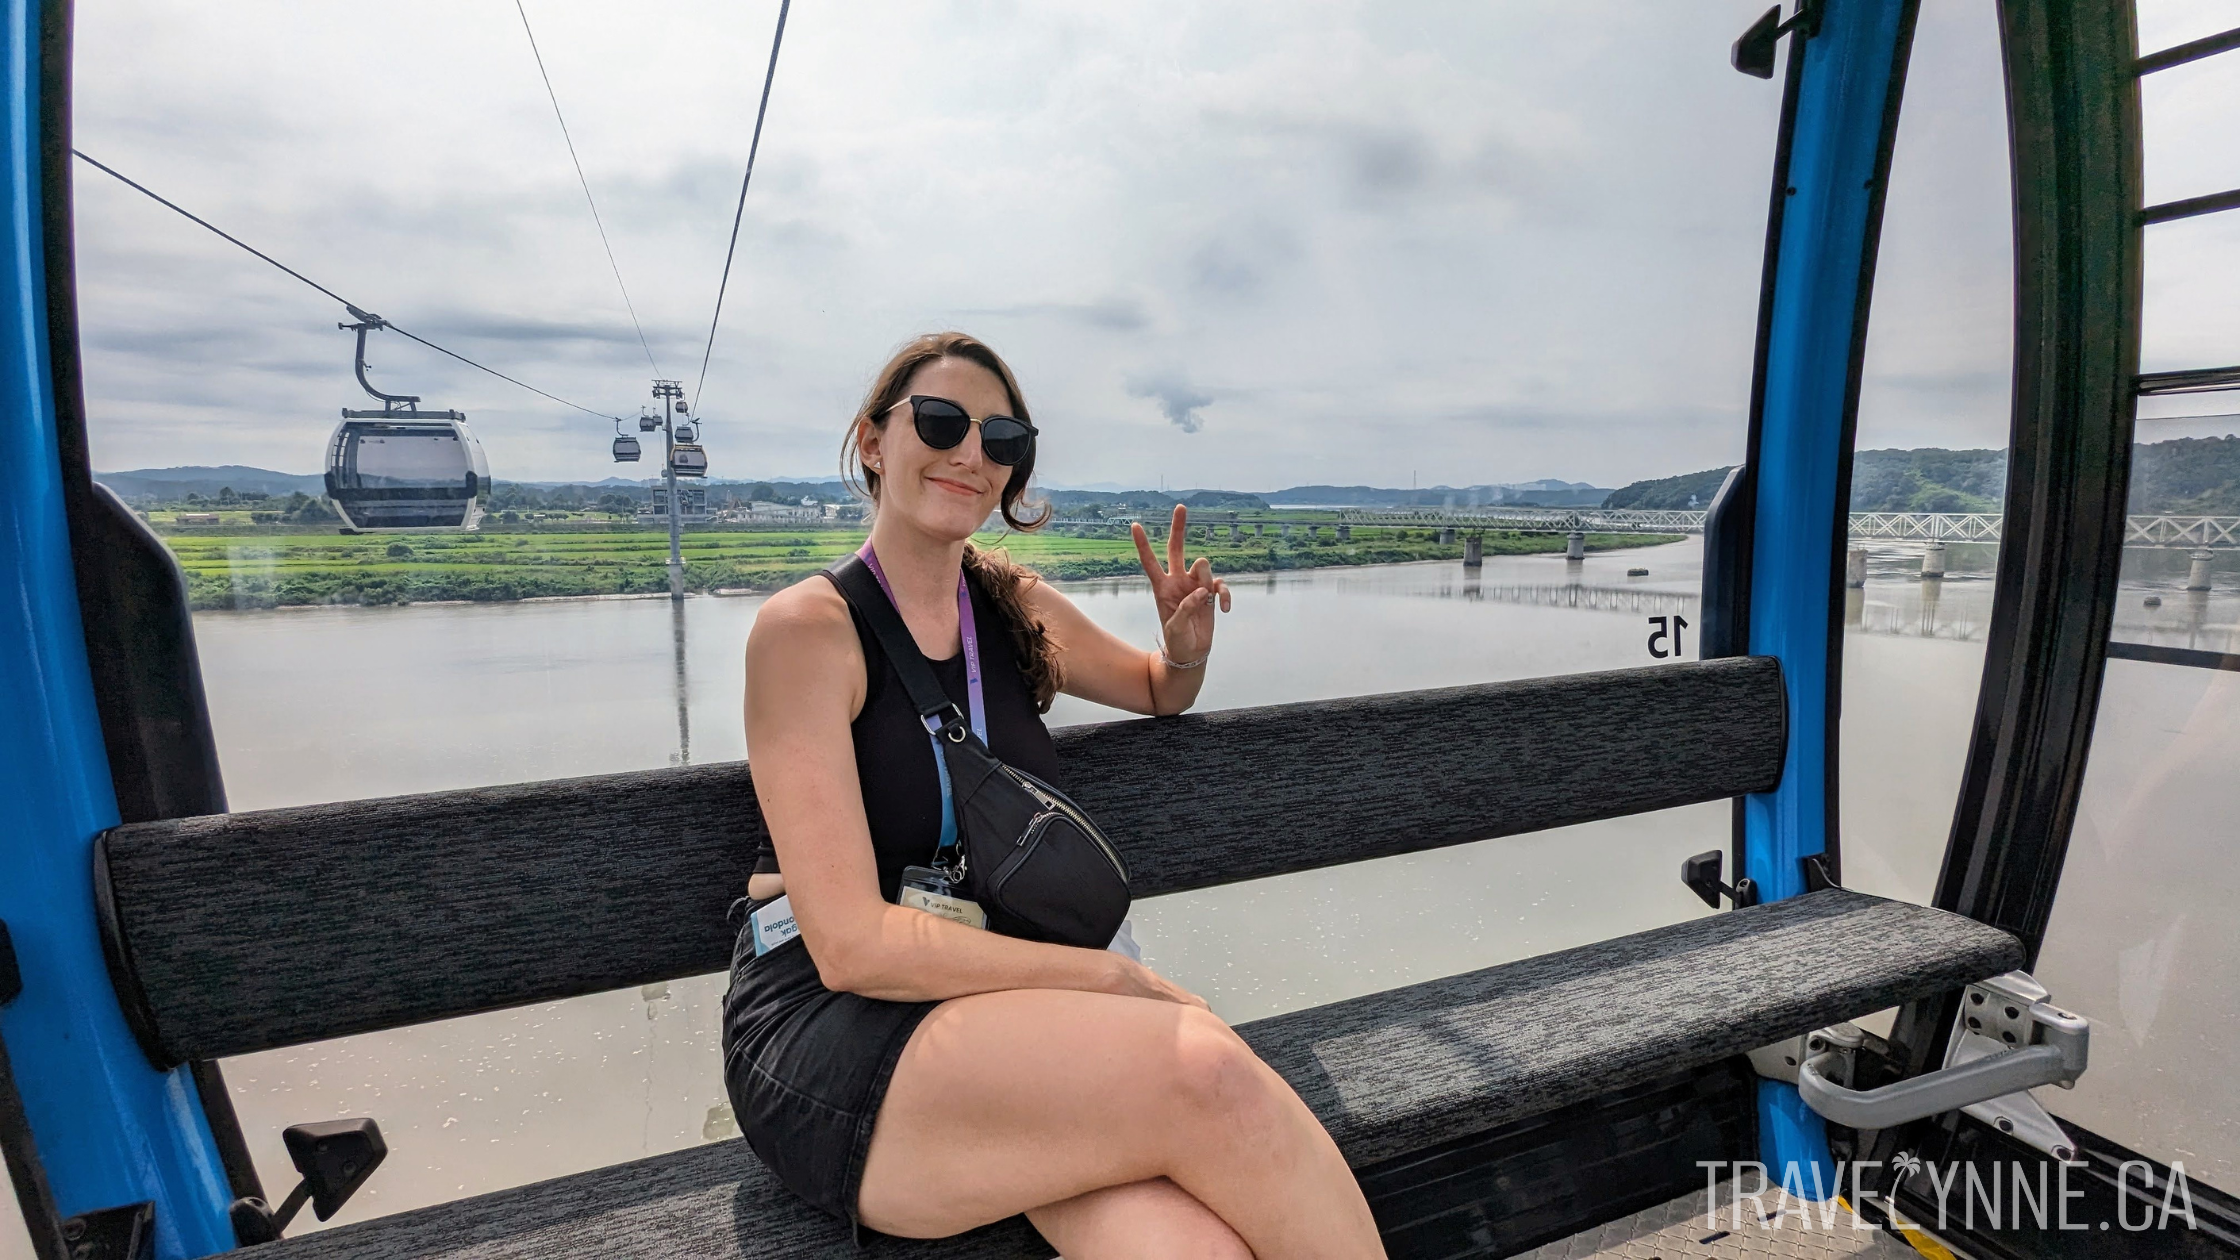 Lynne gives a peace sign with her hand while sitting on the Imjingak Peace Gondola over the Imjin River in the DMZ.